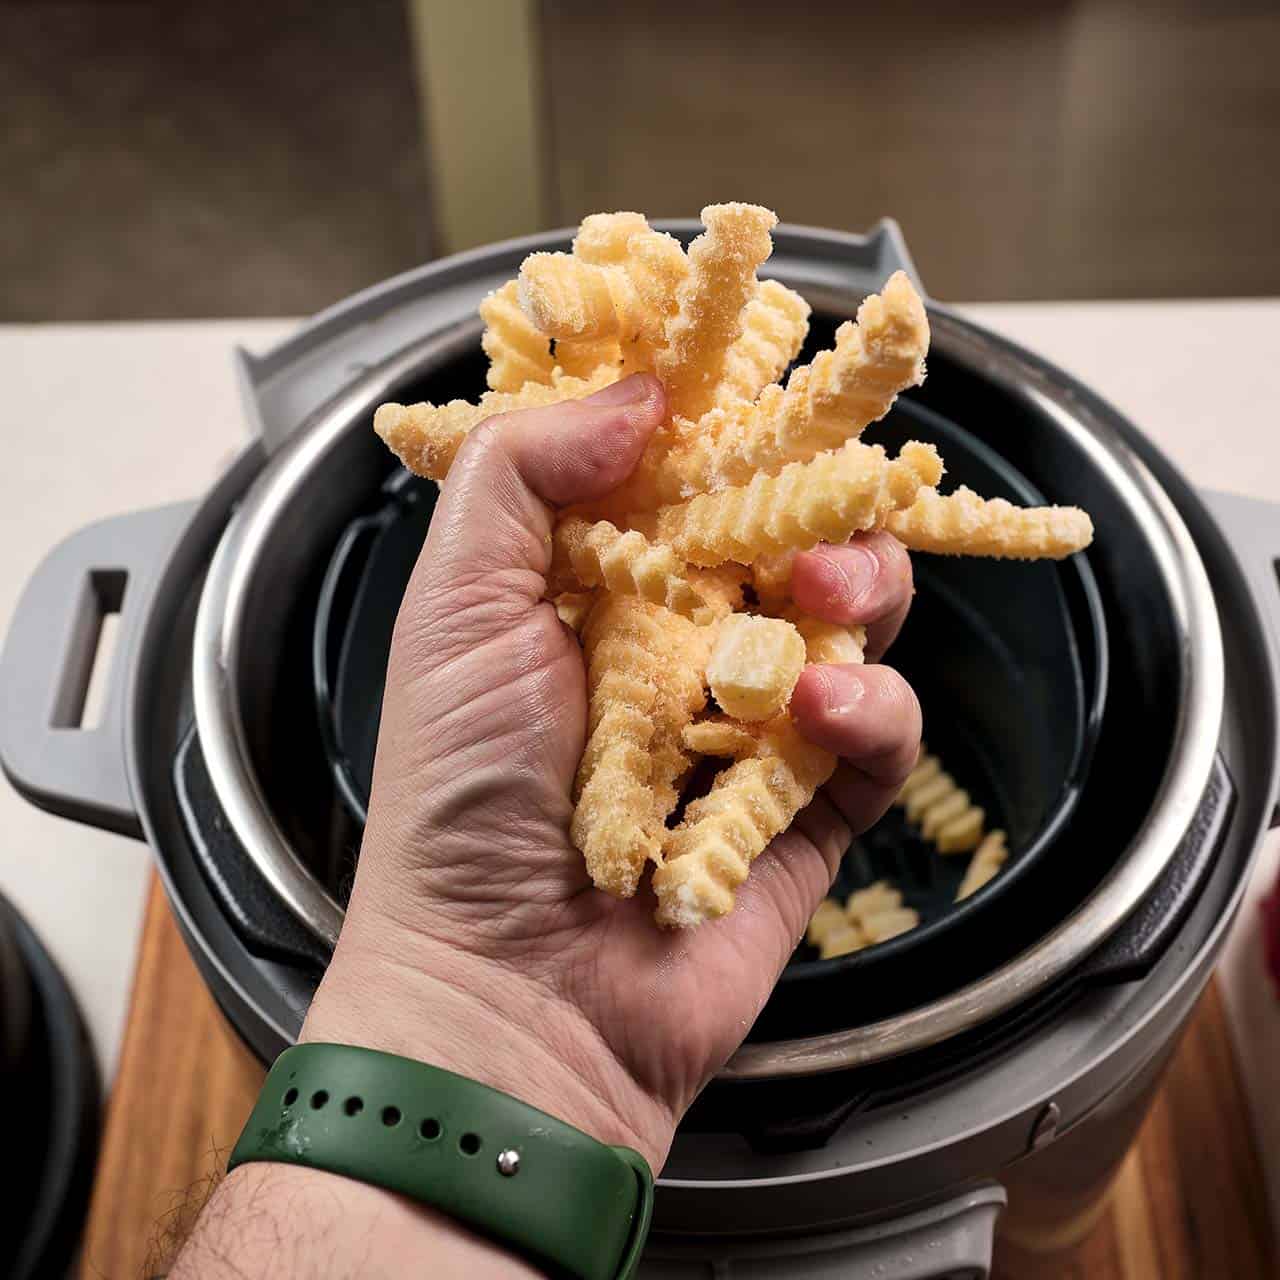 A fistful of frozen french fries